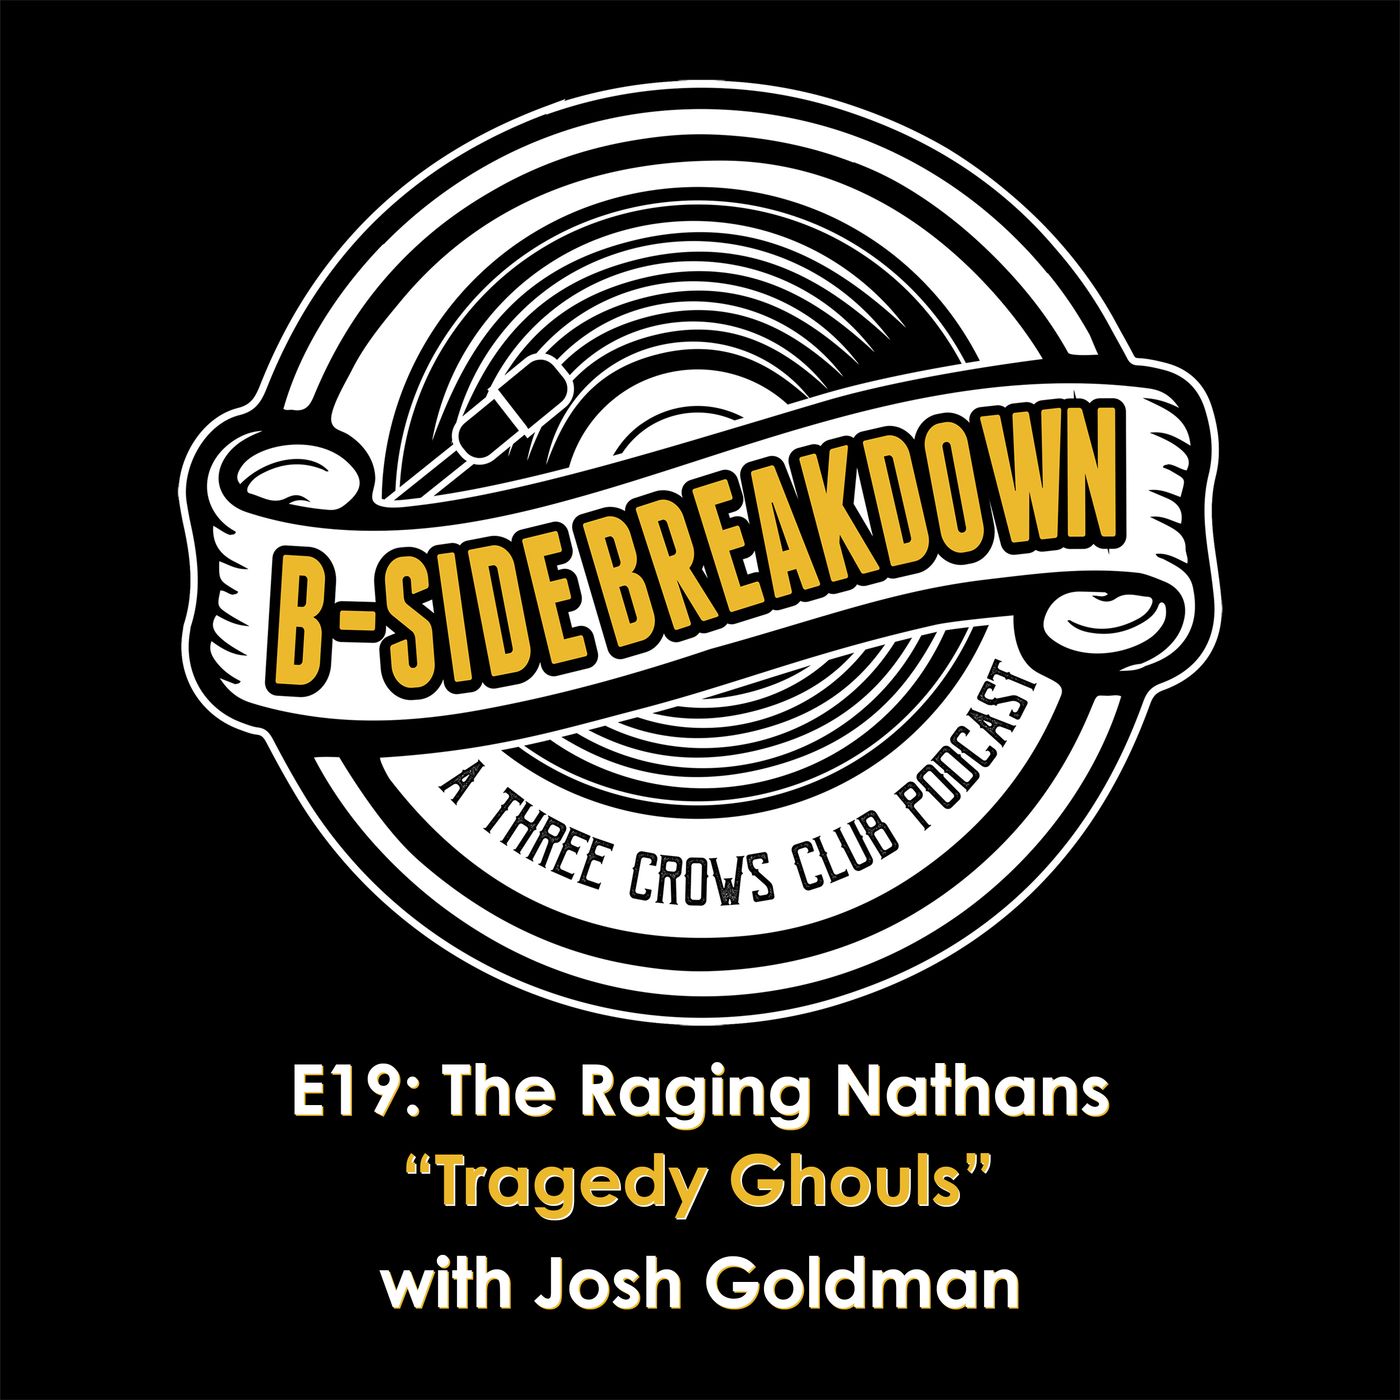 E19 - "Tragedy Ghouls" by The Raging Nathans with Josh Goldman